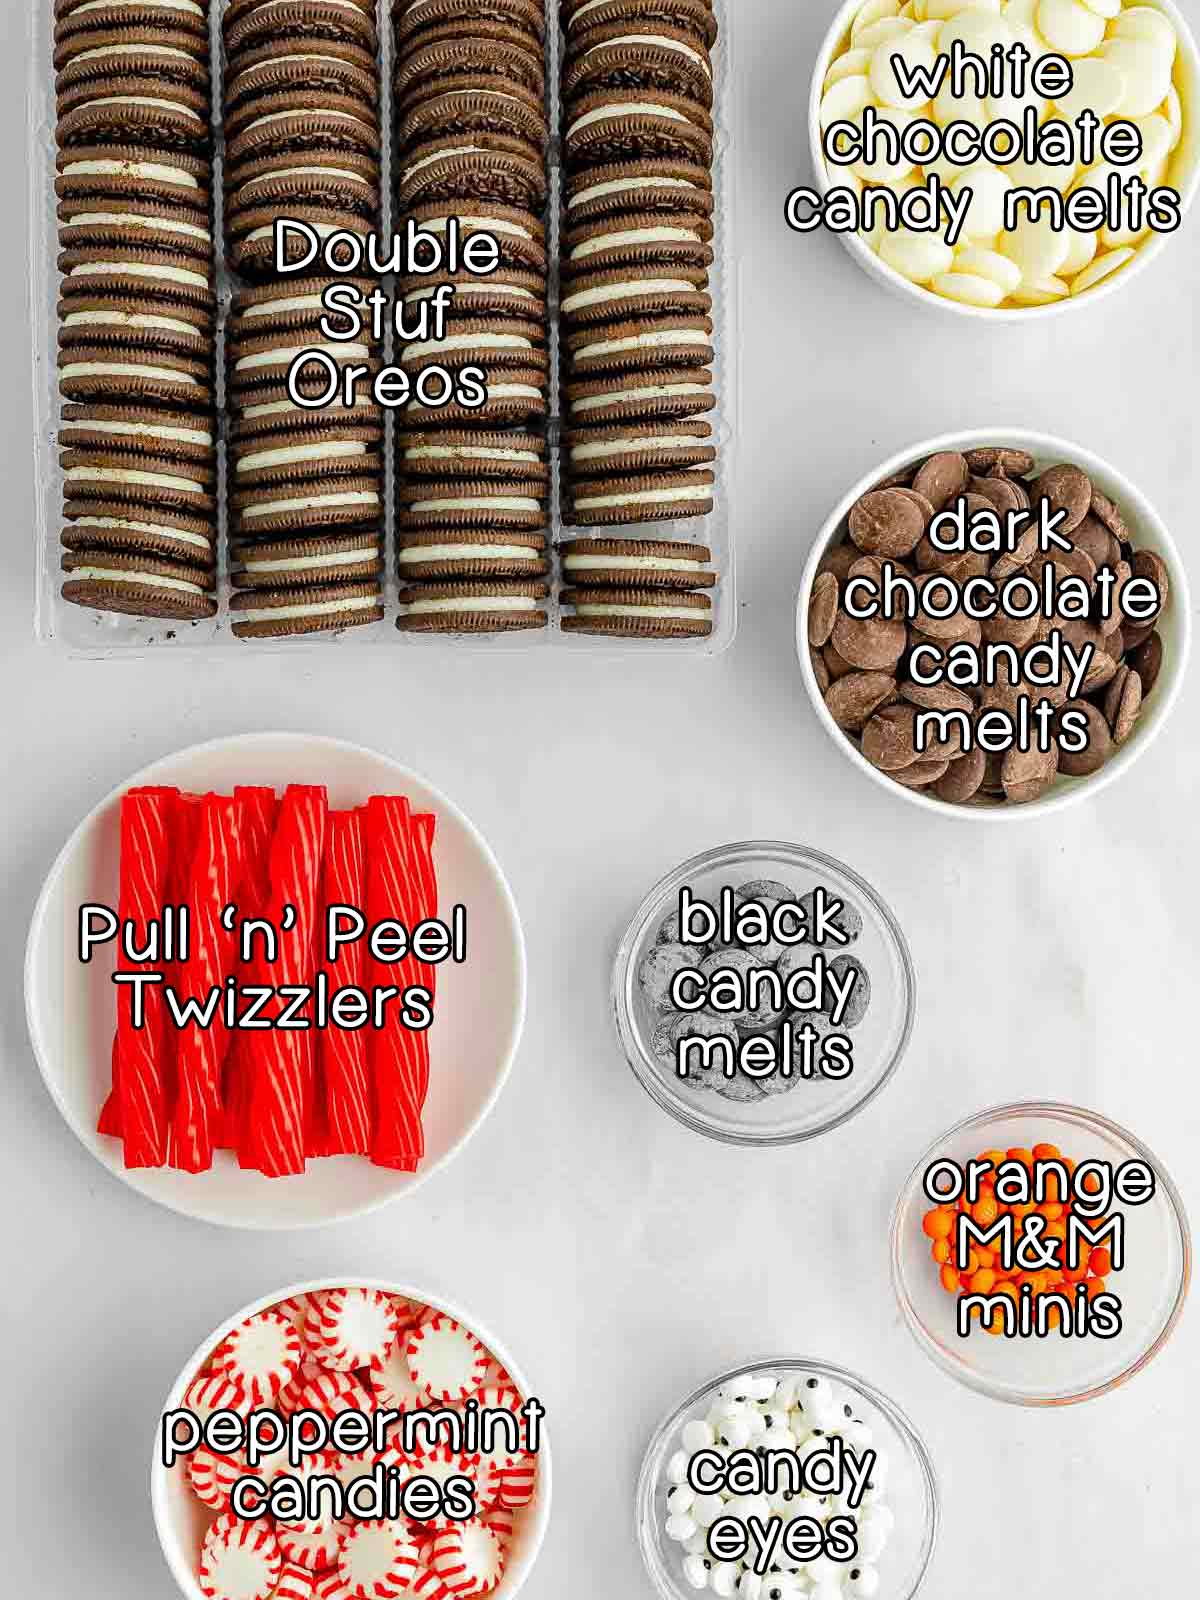 Overhead shot of ingredients - double stuffed Oreos, white chocolate candy melts, dark chocolate candy melts, black candy melts, pull n peel twizzlers, peppermint candies, candy eyes, and orange M&M minis.